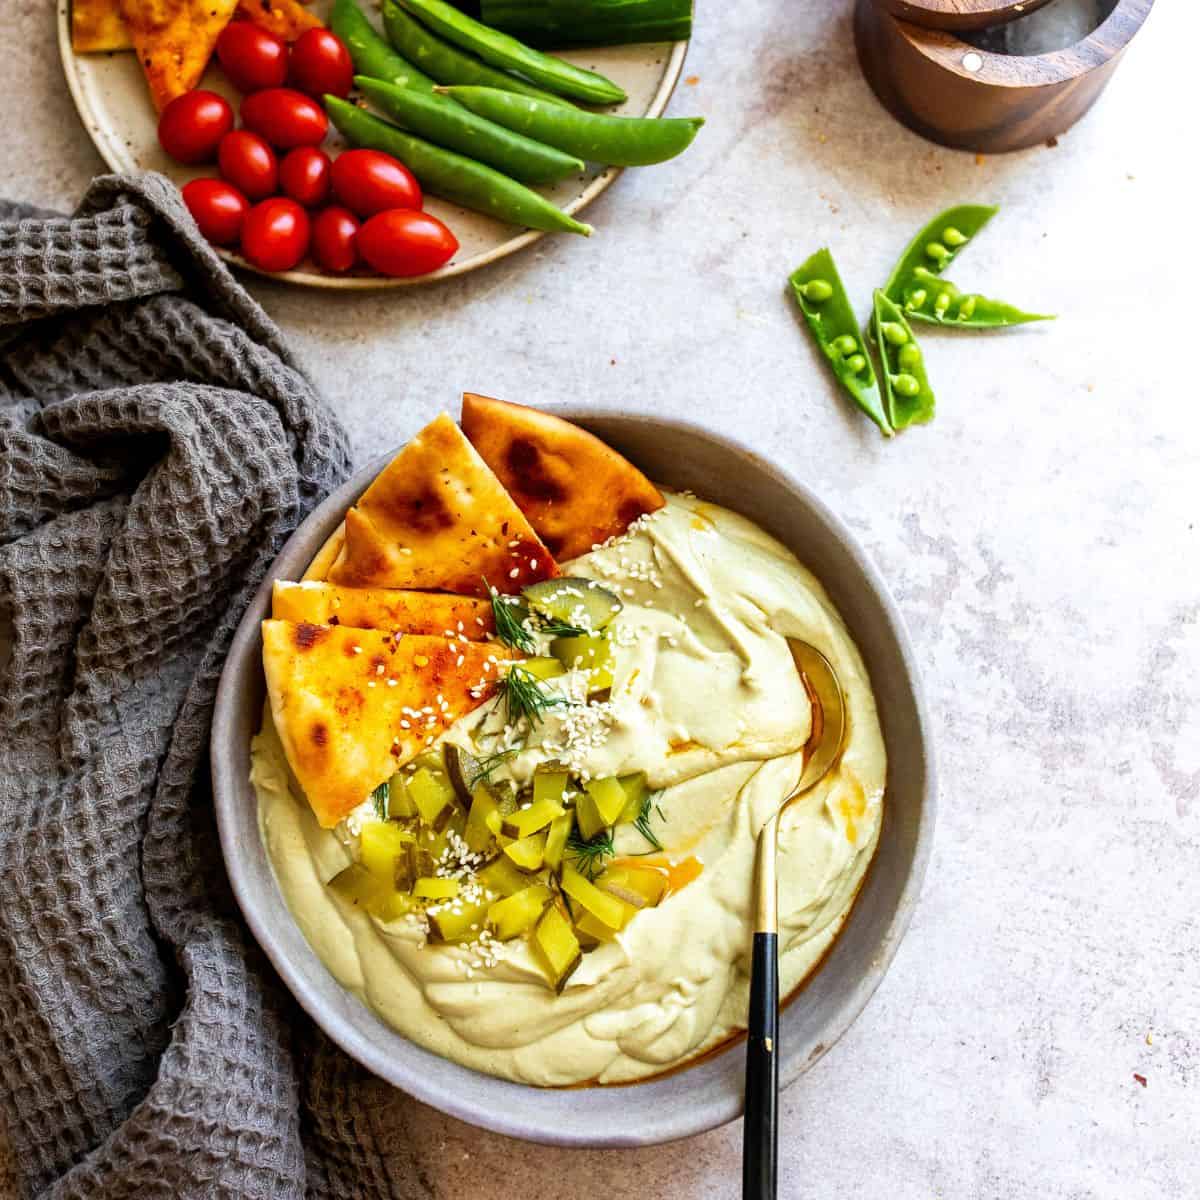 A bowl of dill pickle hummus on the table with pita chips on the side and a bowl of veggies in the background.